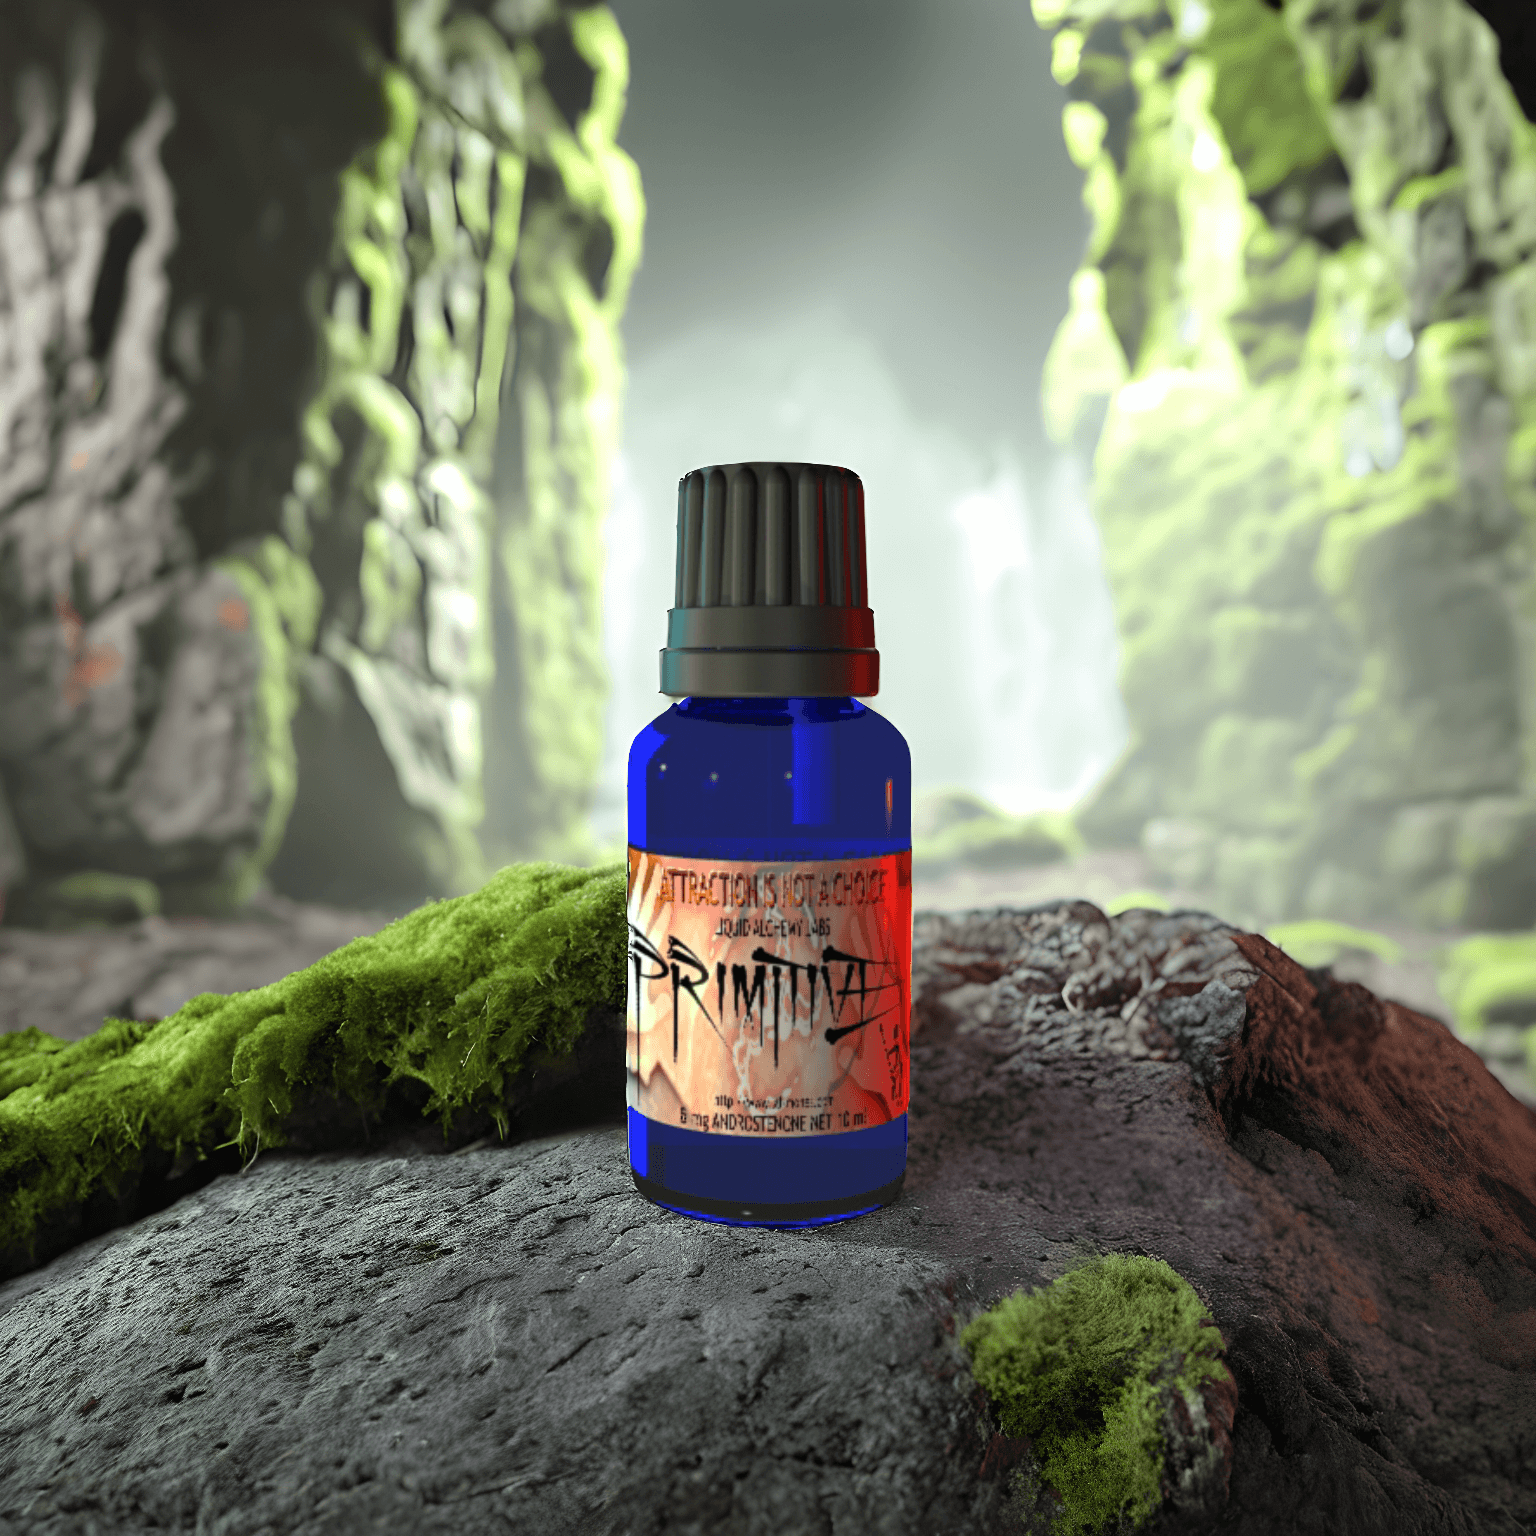 PRIMITIVE™ Androstenone Pheromone Oil by Royal Pheromones in blue bottle, displayed in a mossy, rocky cave setting – Pheromone Perfumes, Pheromone Oil, Pheromone Colognes.